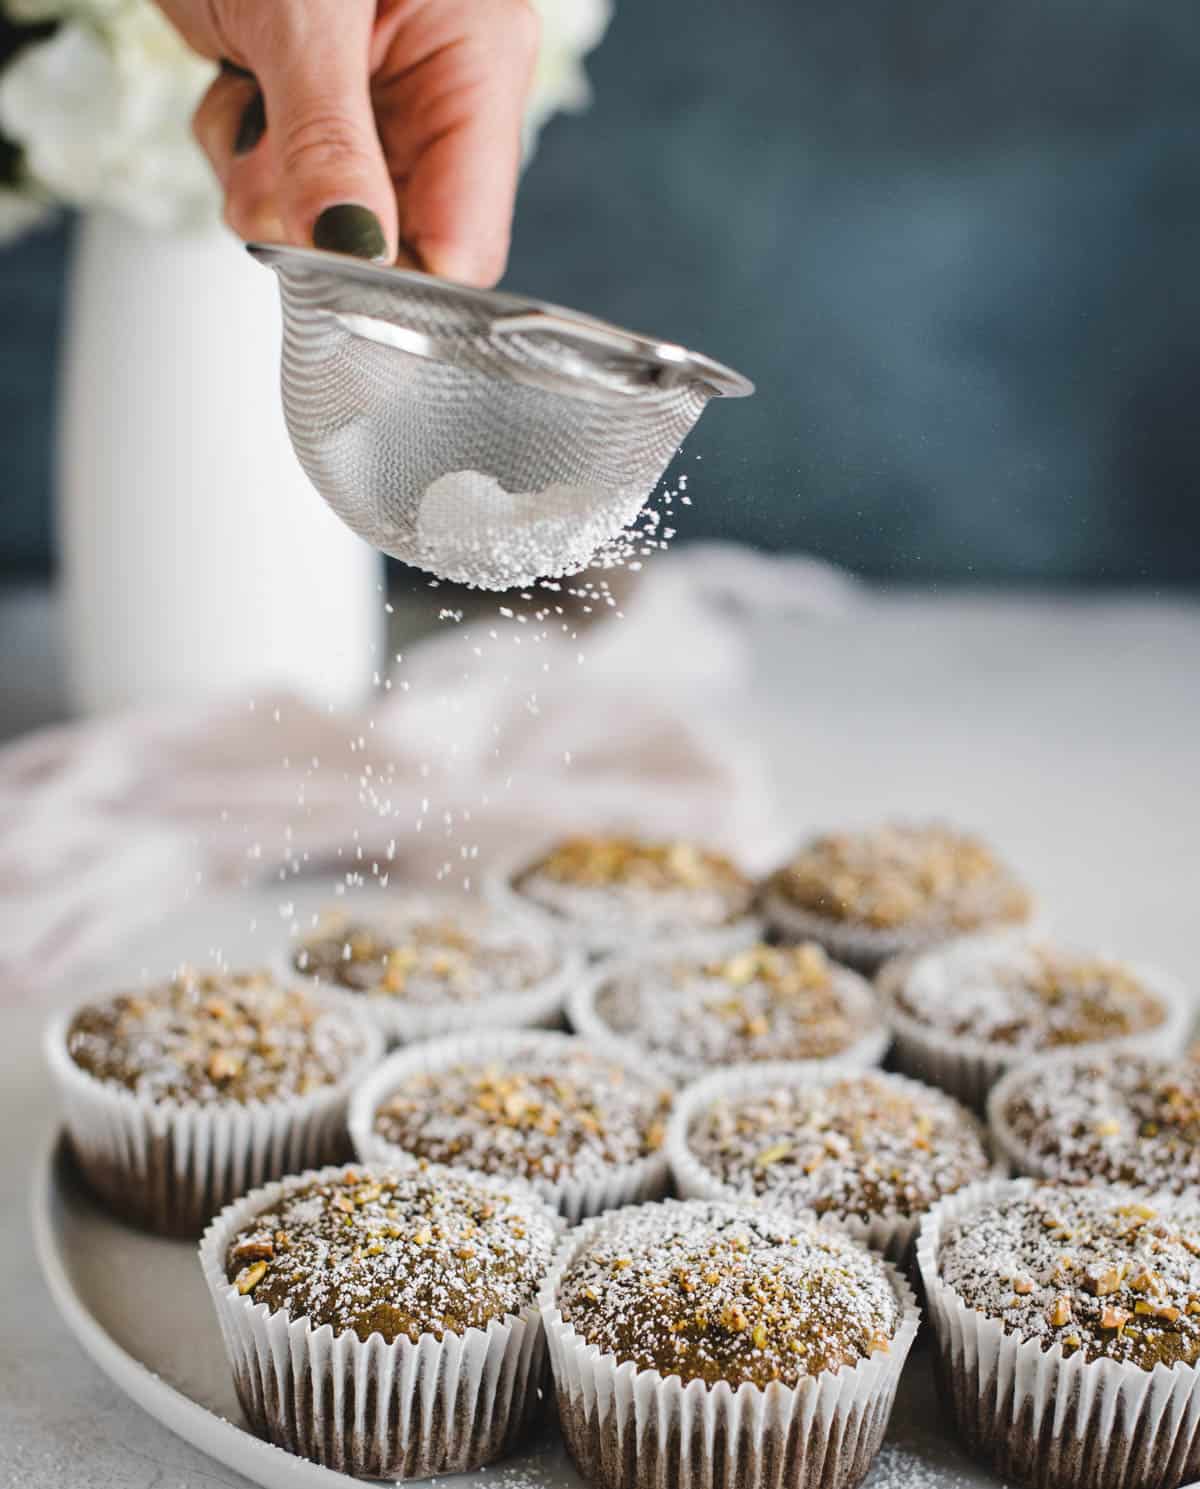 Hand using small sieve strainer to sprinkle powdered sugar on muffins